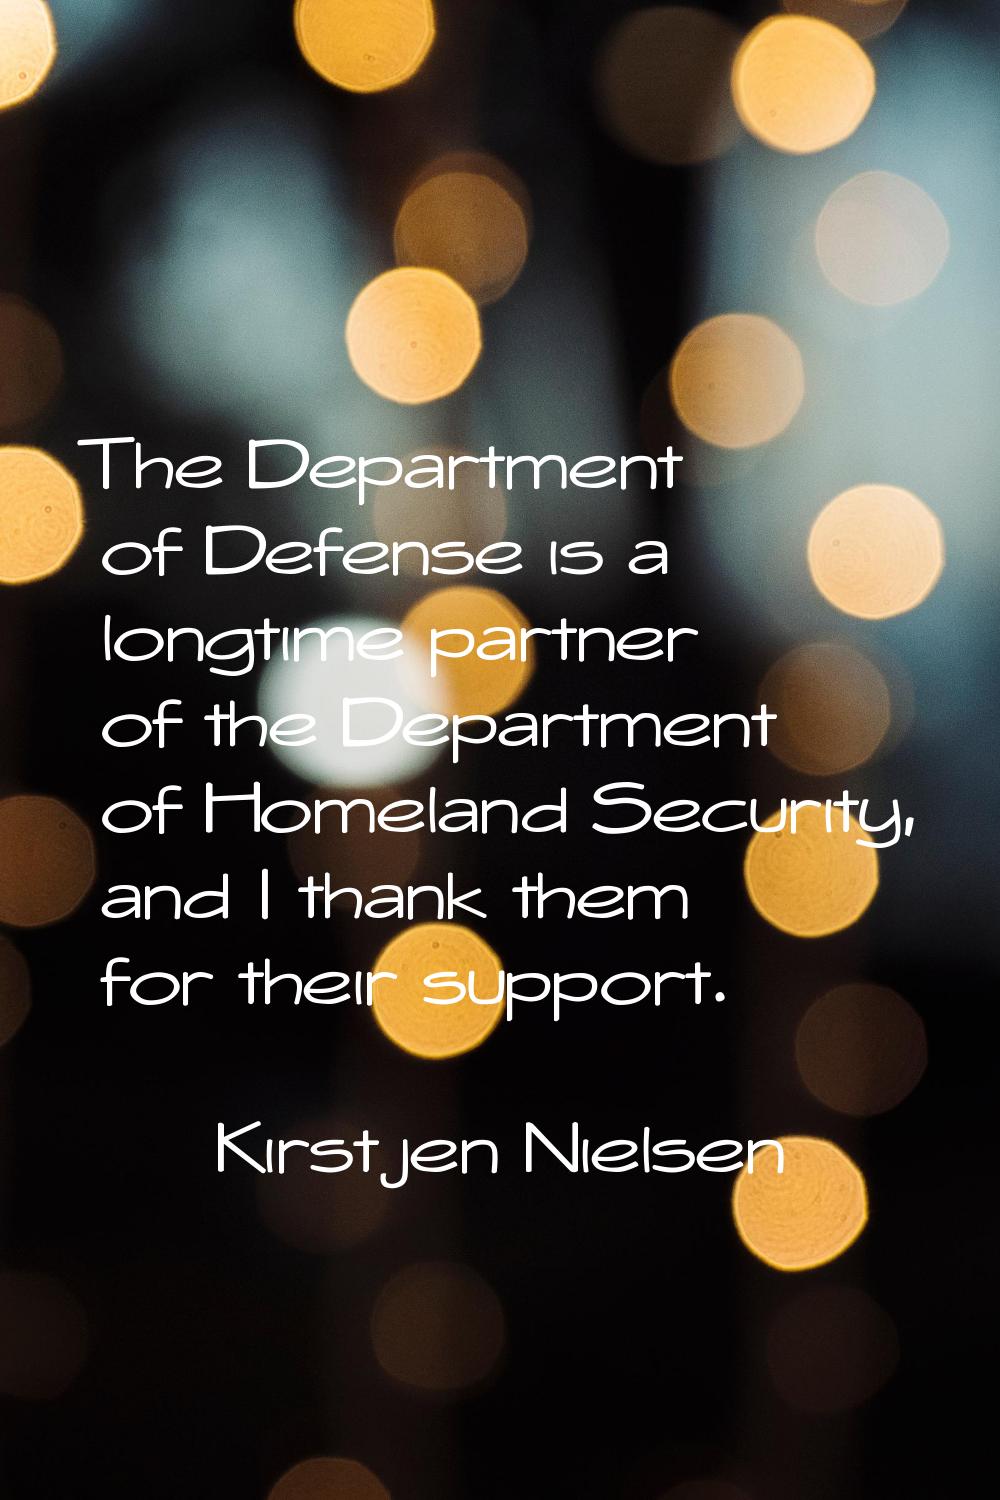 The Department of Defense is a longtime partner of the Department of Homeland Security, and I thank